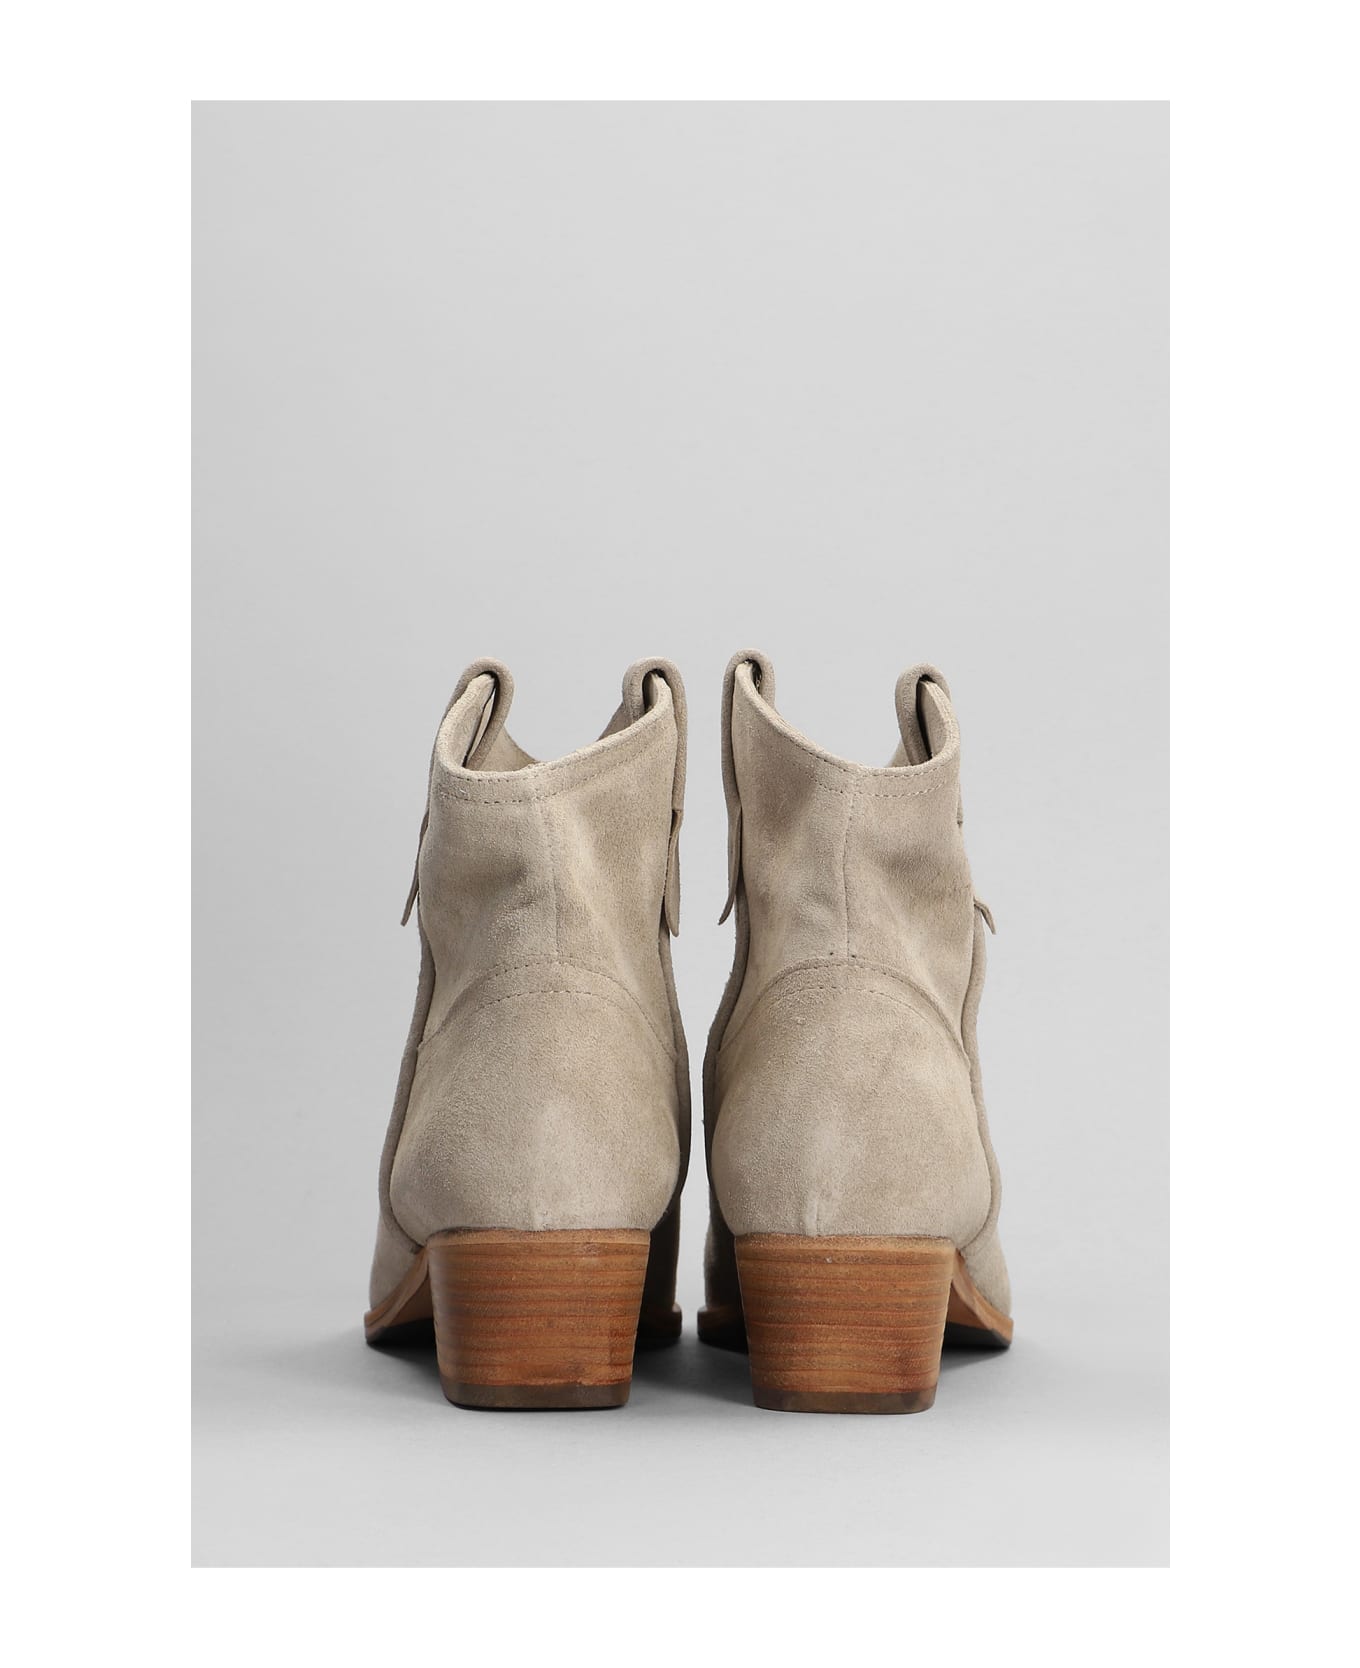 Julie Dee Texan Ankle Boots In Taupe Suede - taupe